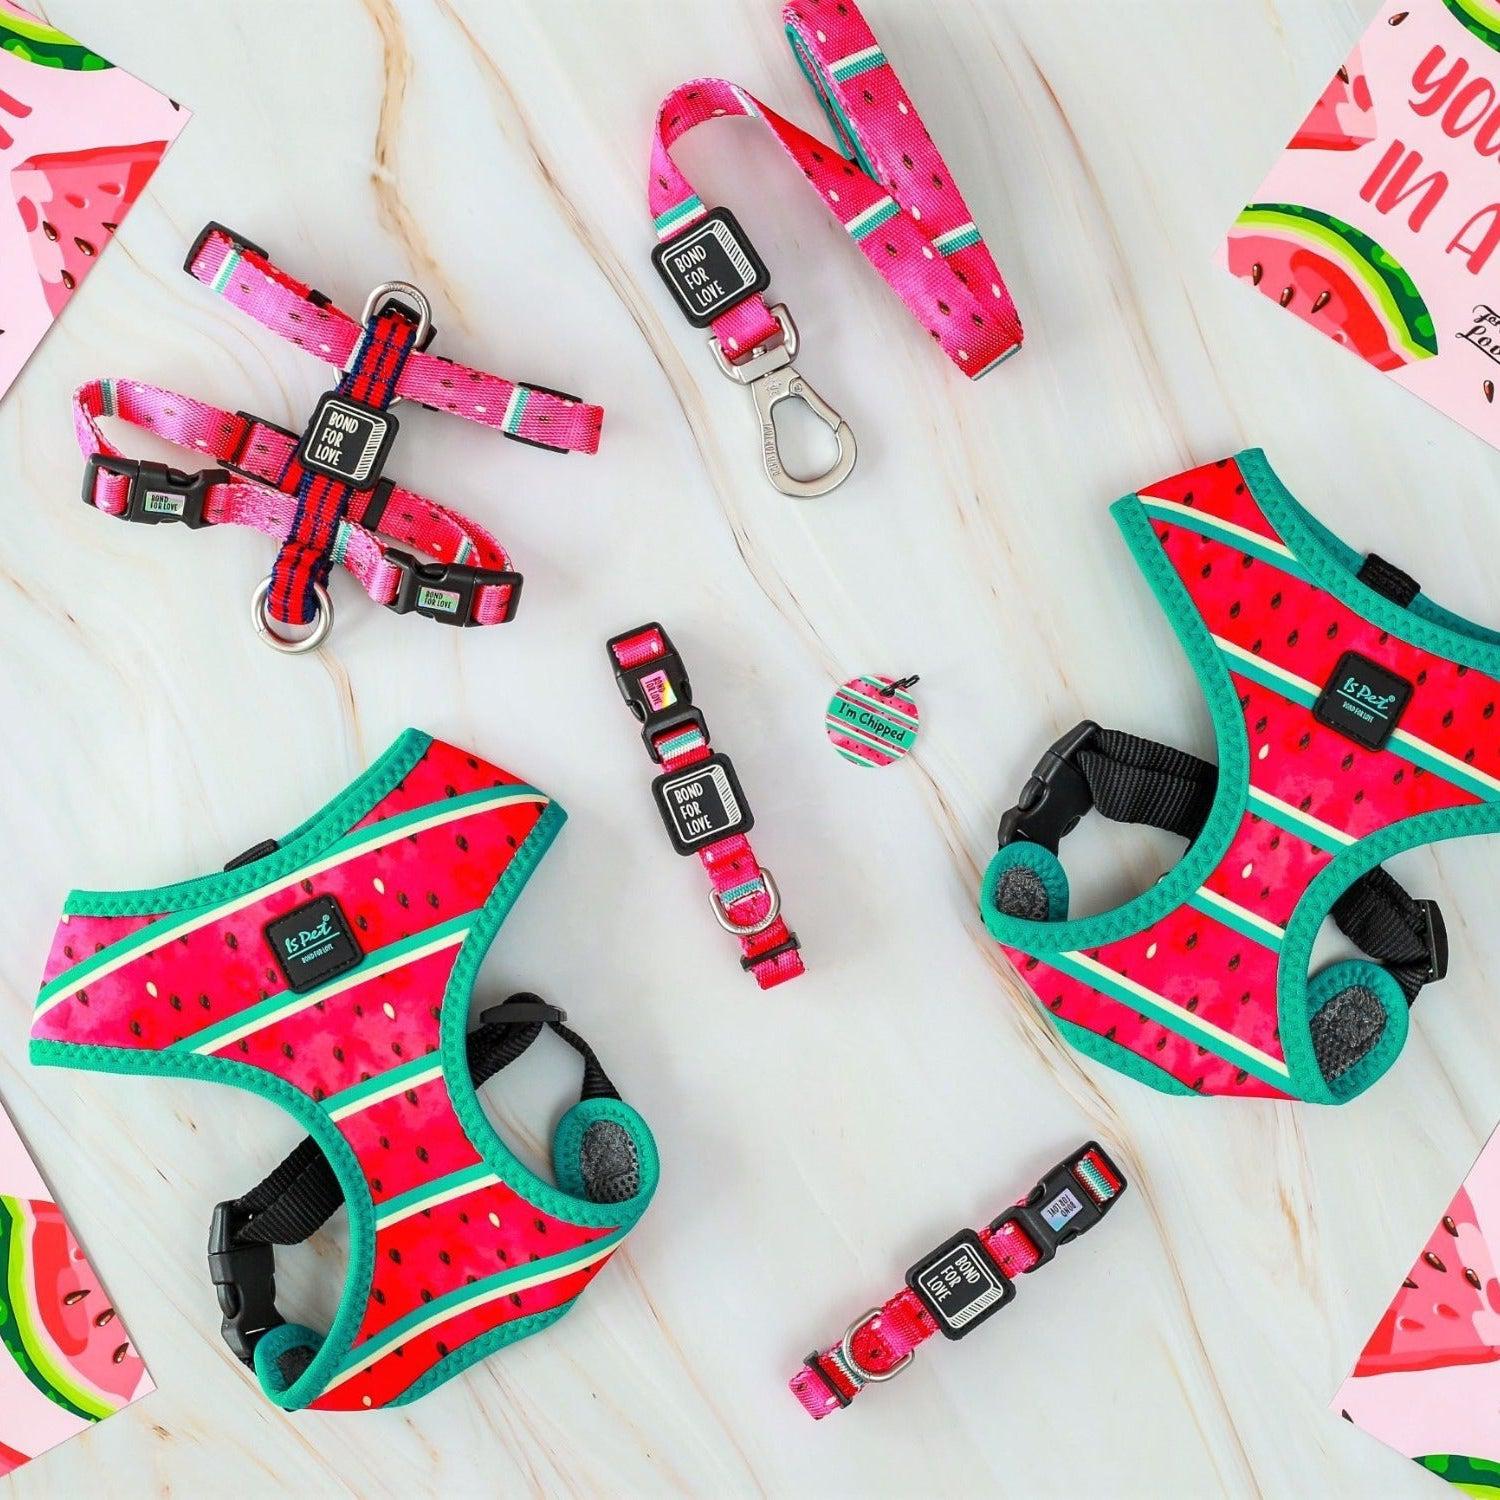 Watermelon Collection